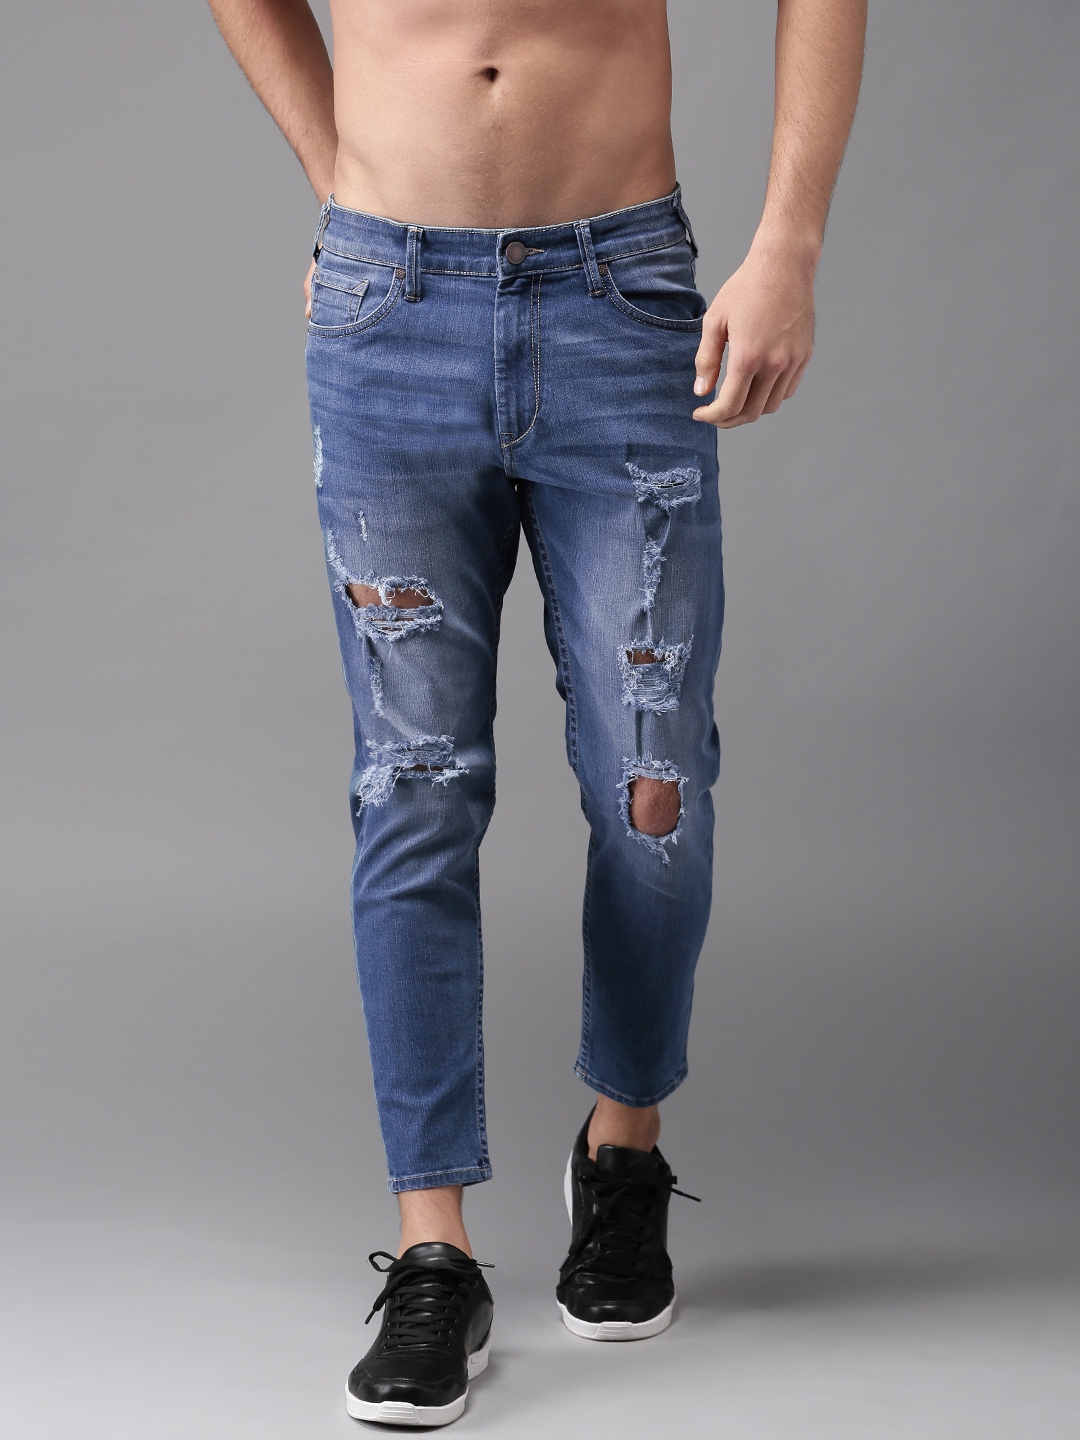 Comfort Fit Ripped Ankle Length Highly Torn Jeans For Men, Blue at Rs  950/piece in Bengaluru